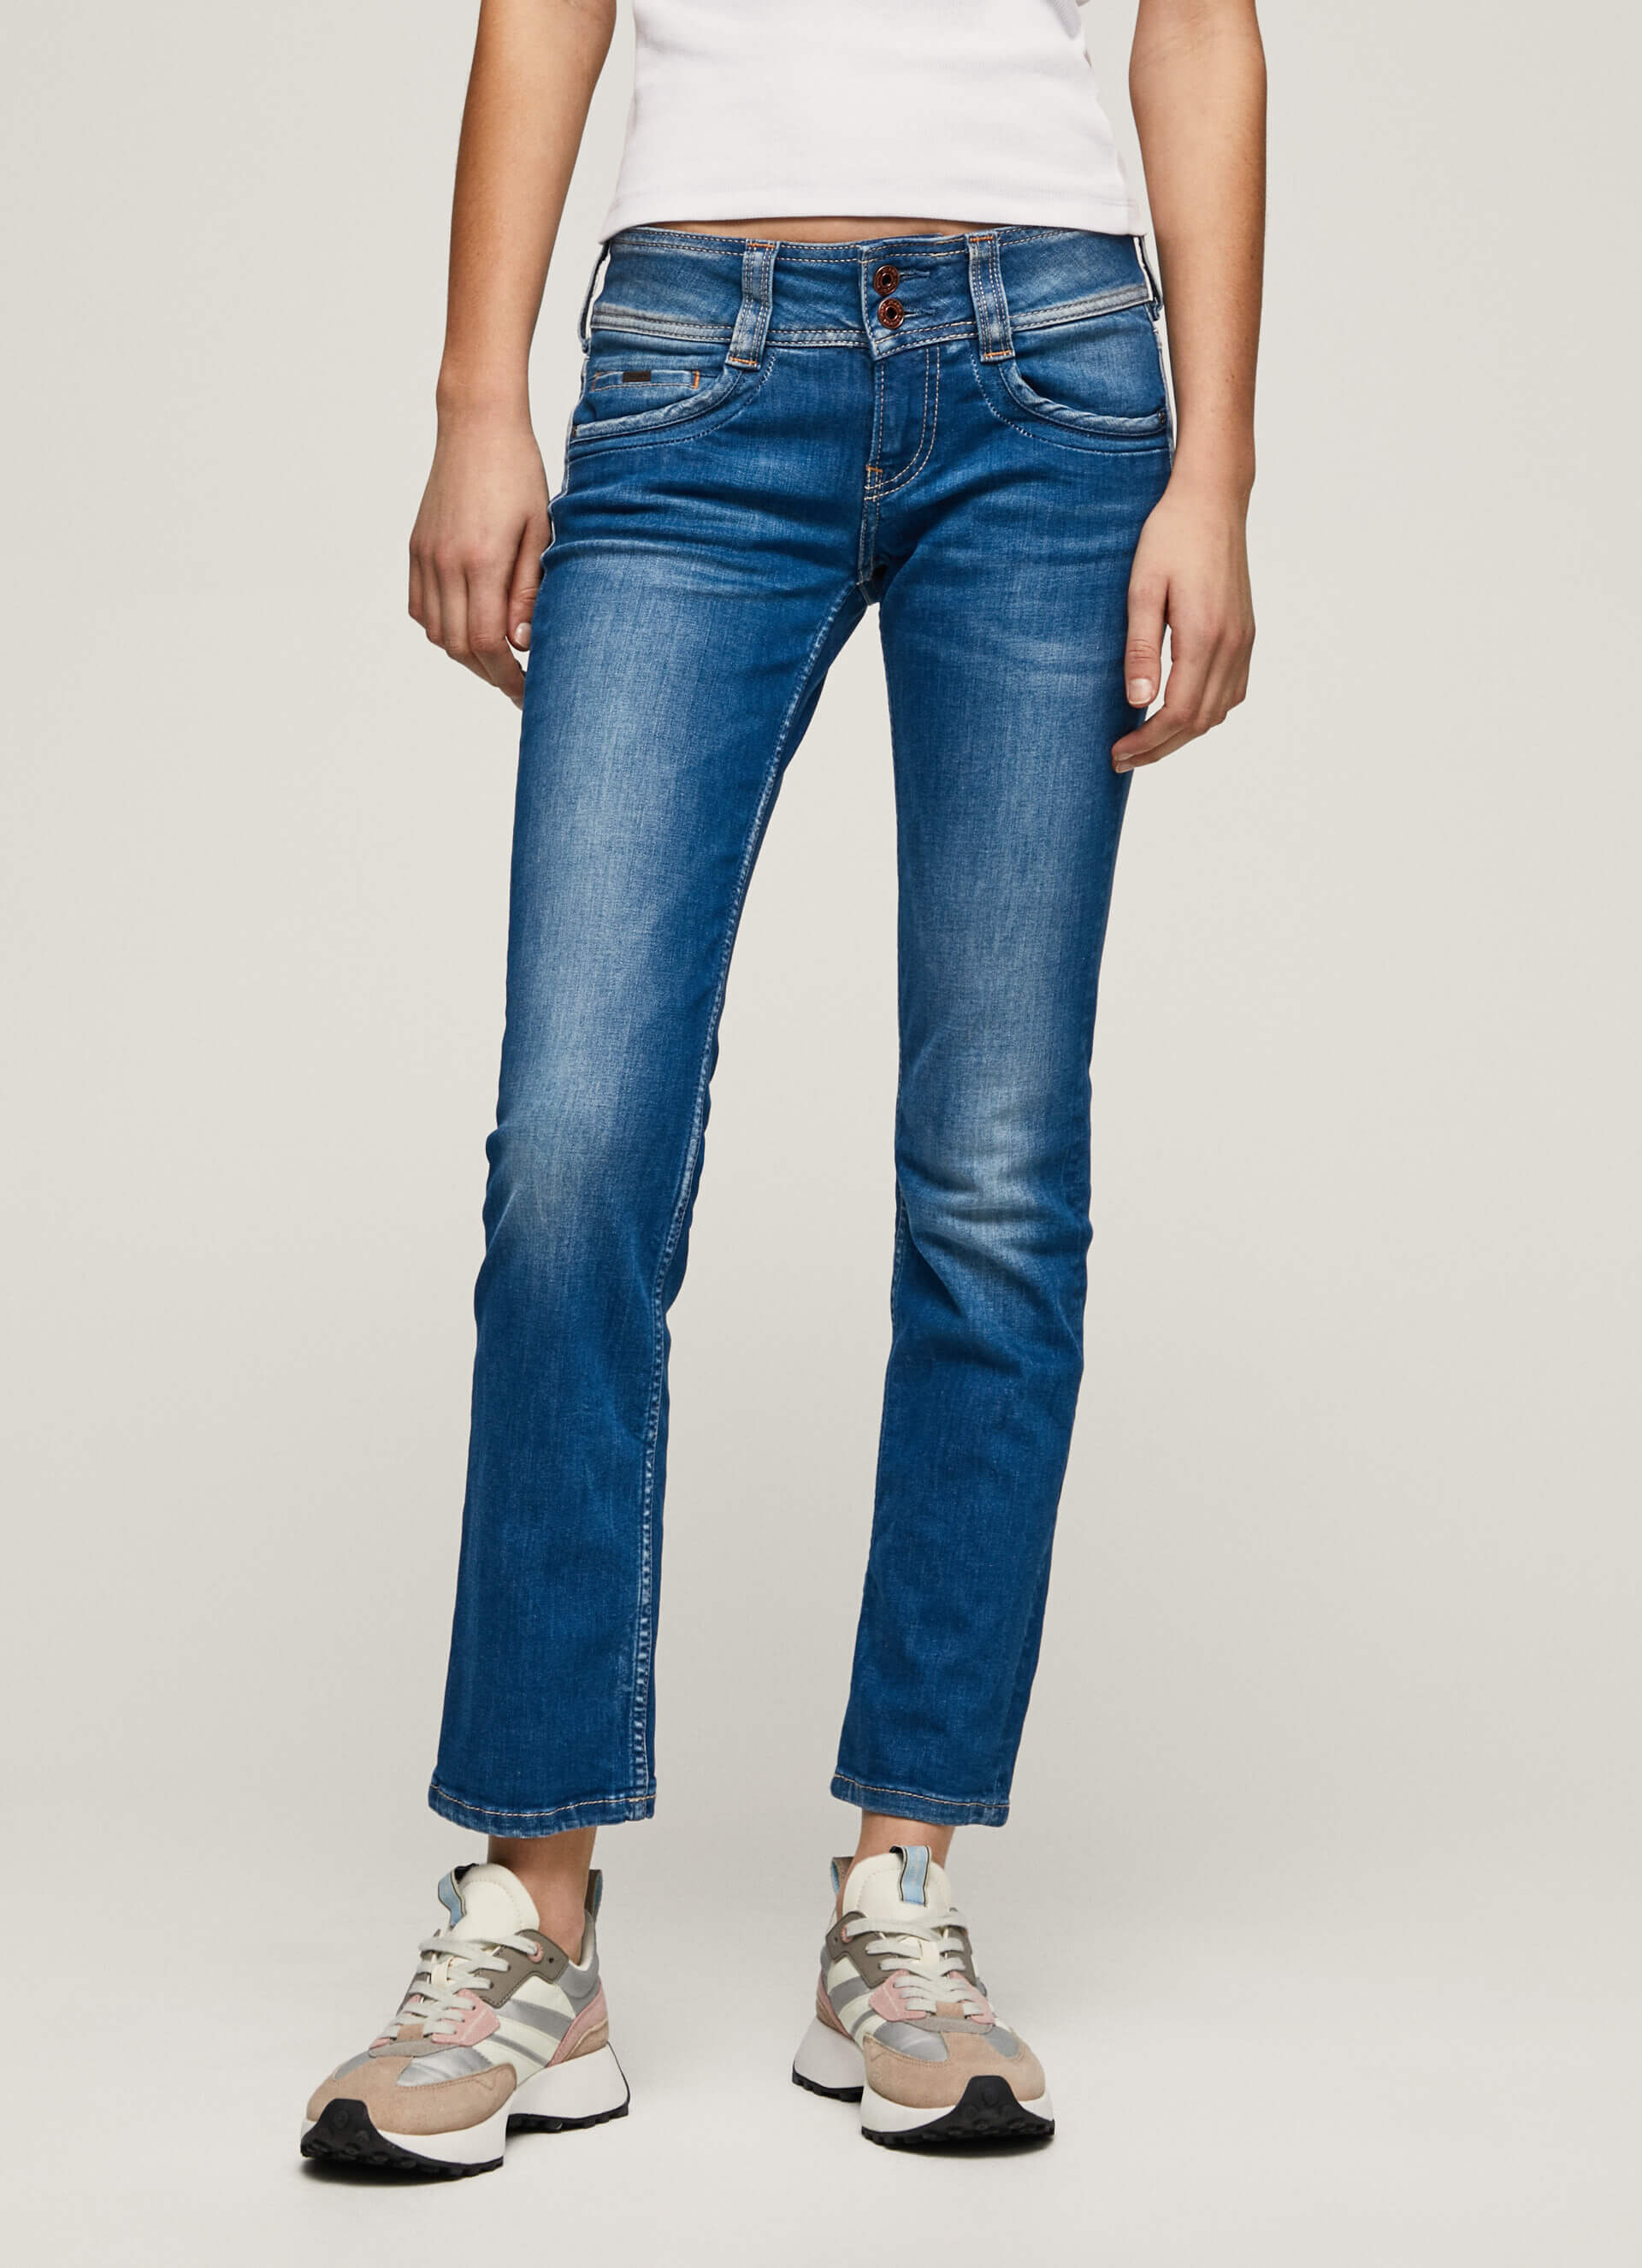 View all | Women's Jeans